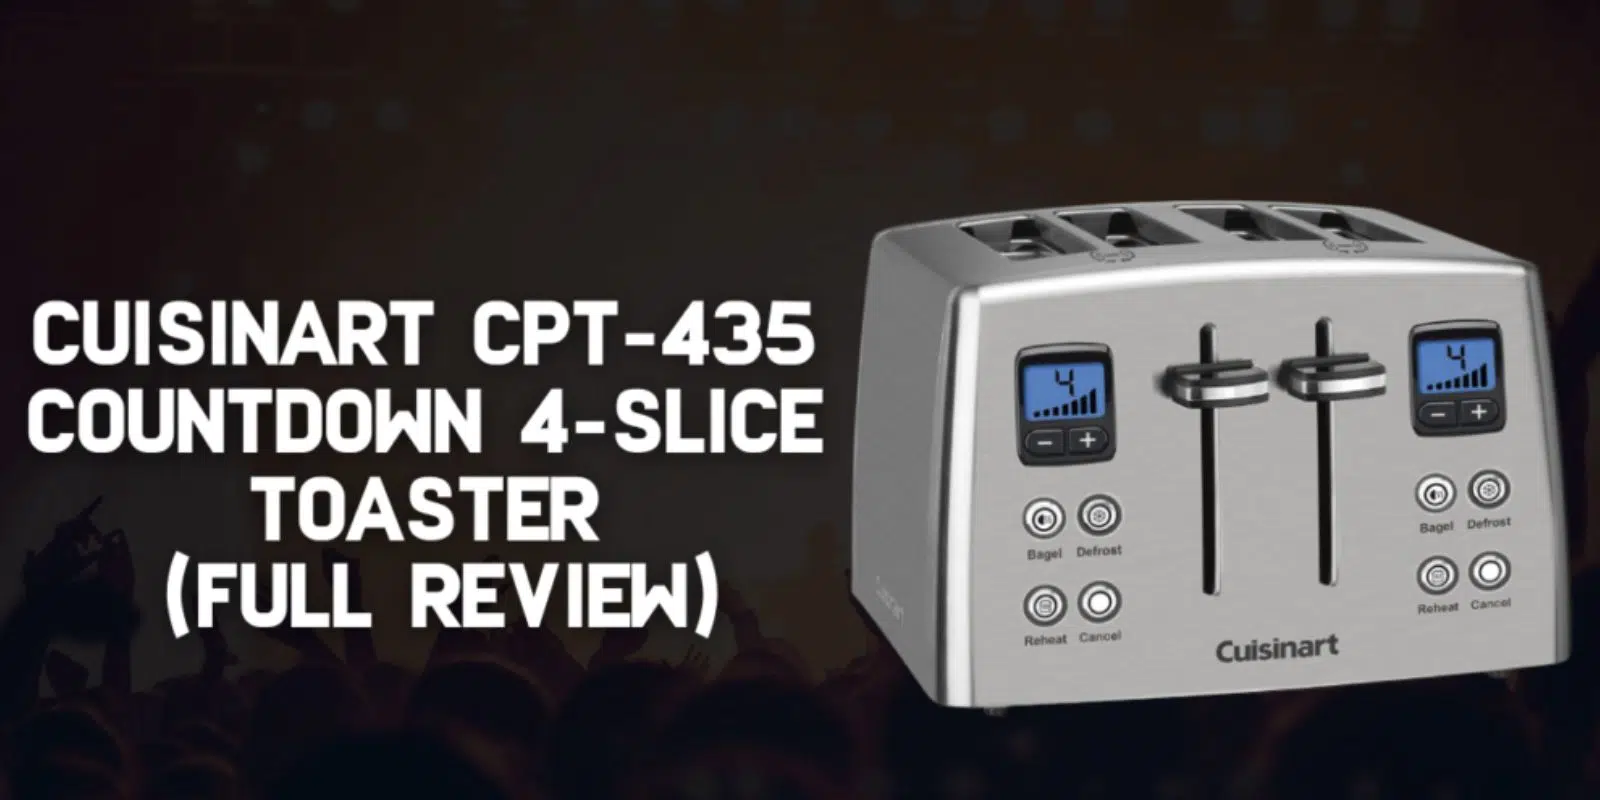 Cuisinart CPT-435 Countdown 4-Slice Toaster (Full Review)